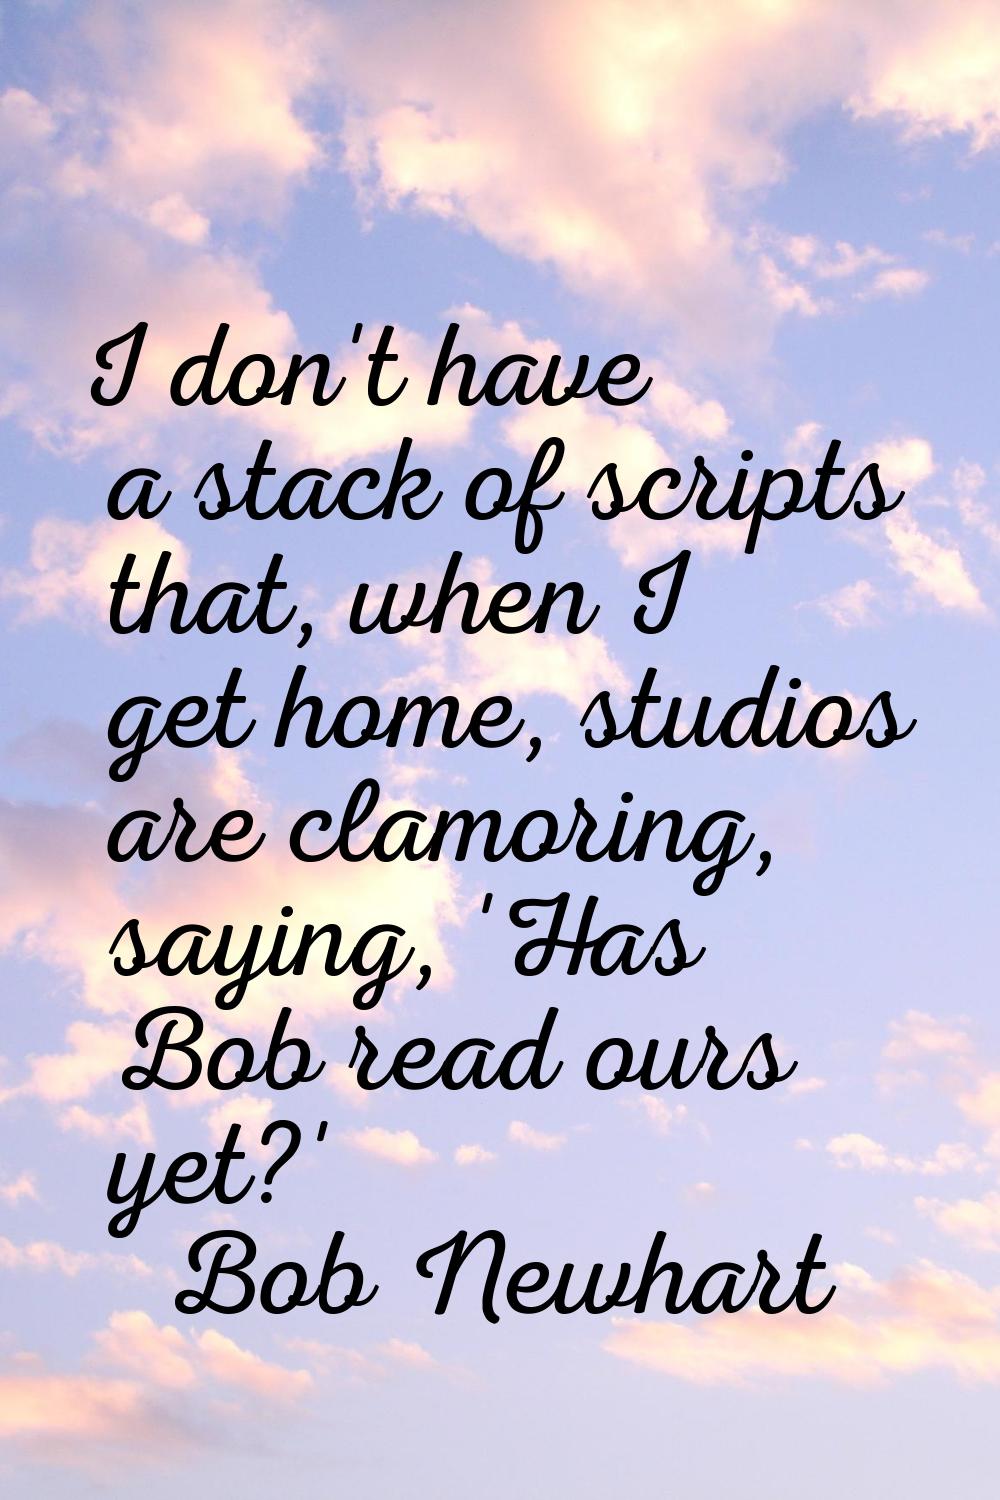 I don't have a stack of scripts that, when I get home, studios are clamoring, saying, 'Has Bob read